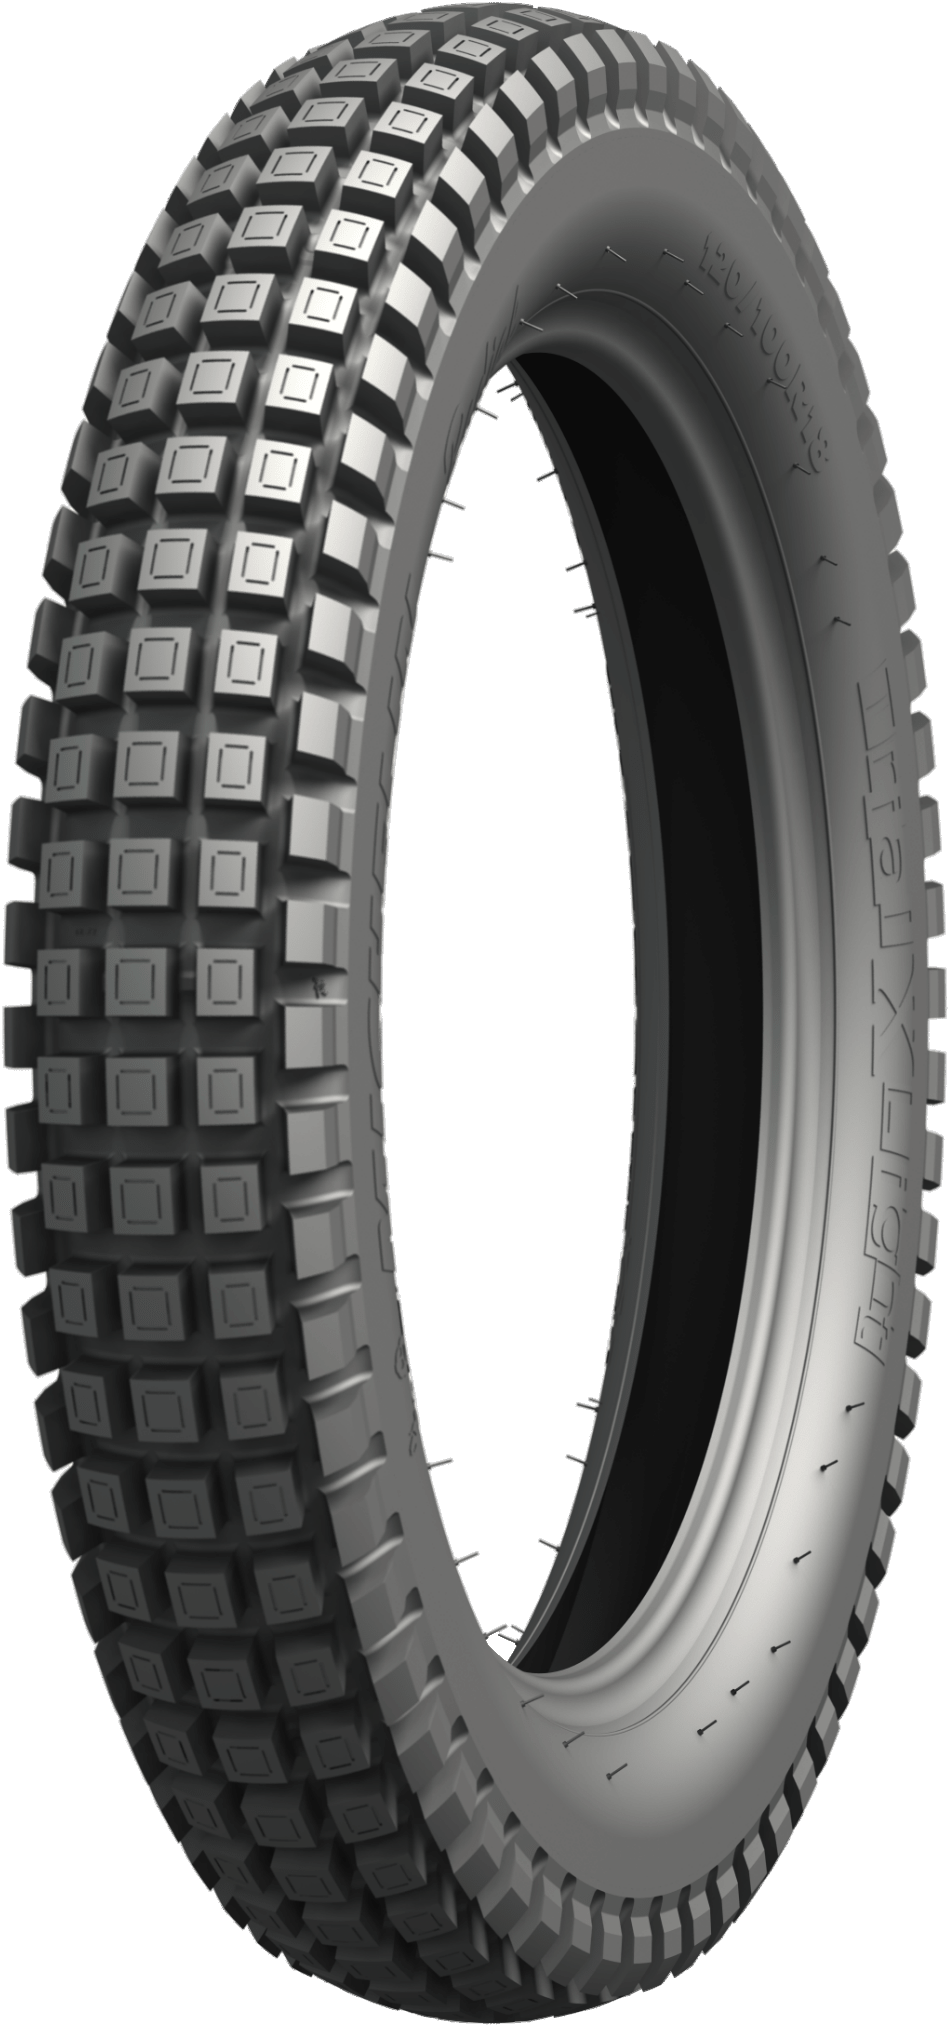 Enduro anvelope MICHELIN Trial X Light Competition 120/100 R18 68M